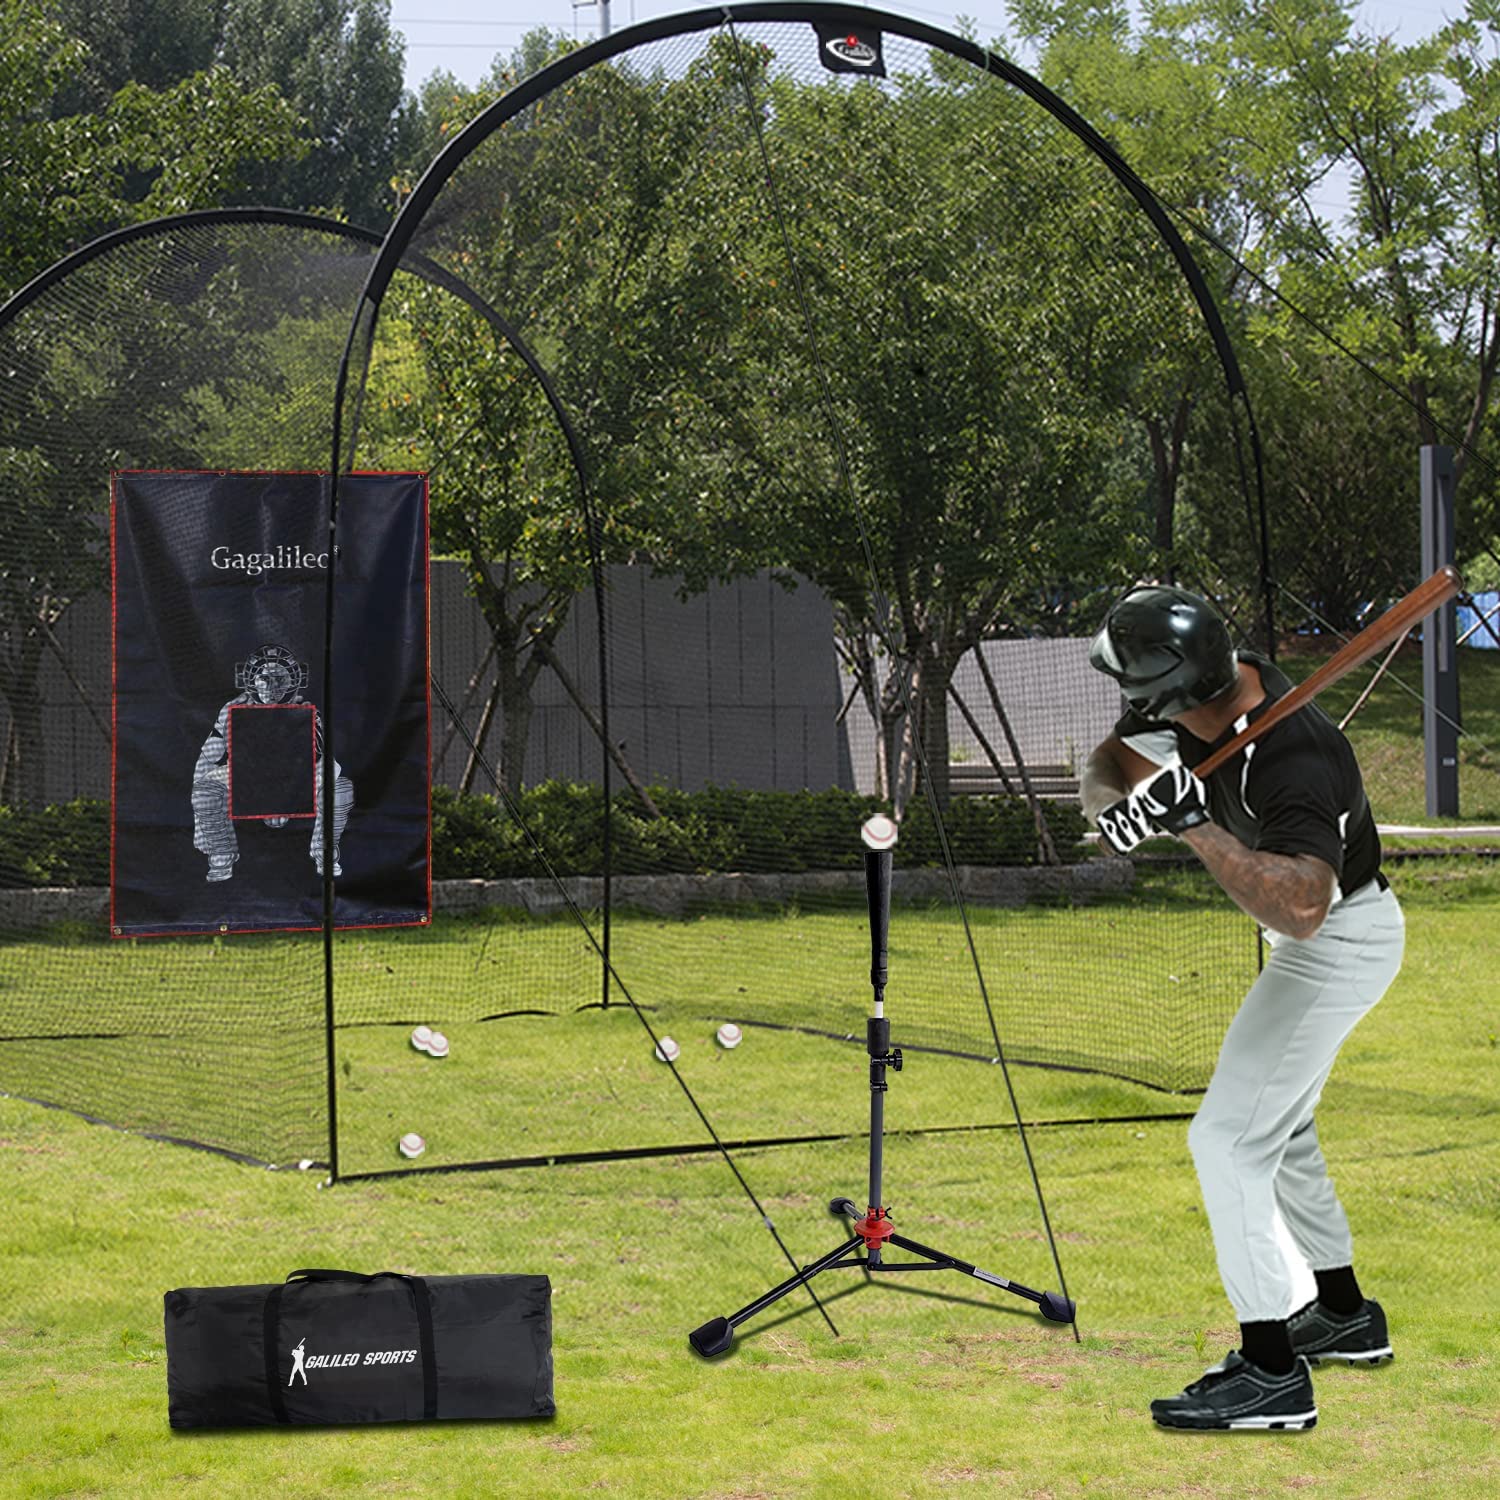 Galileo Softball Backstop Vinilo Heavy Duty Baseball Bating Cage Backstop Pitching Zone Target Trainer Backstop Net Saver con Catcher Image 5X6FT